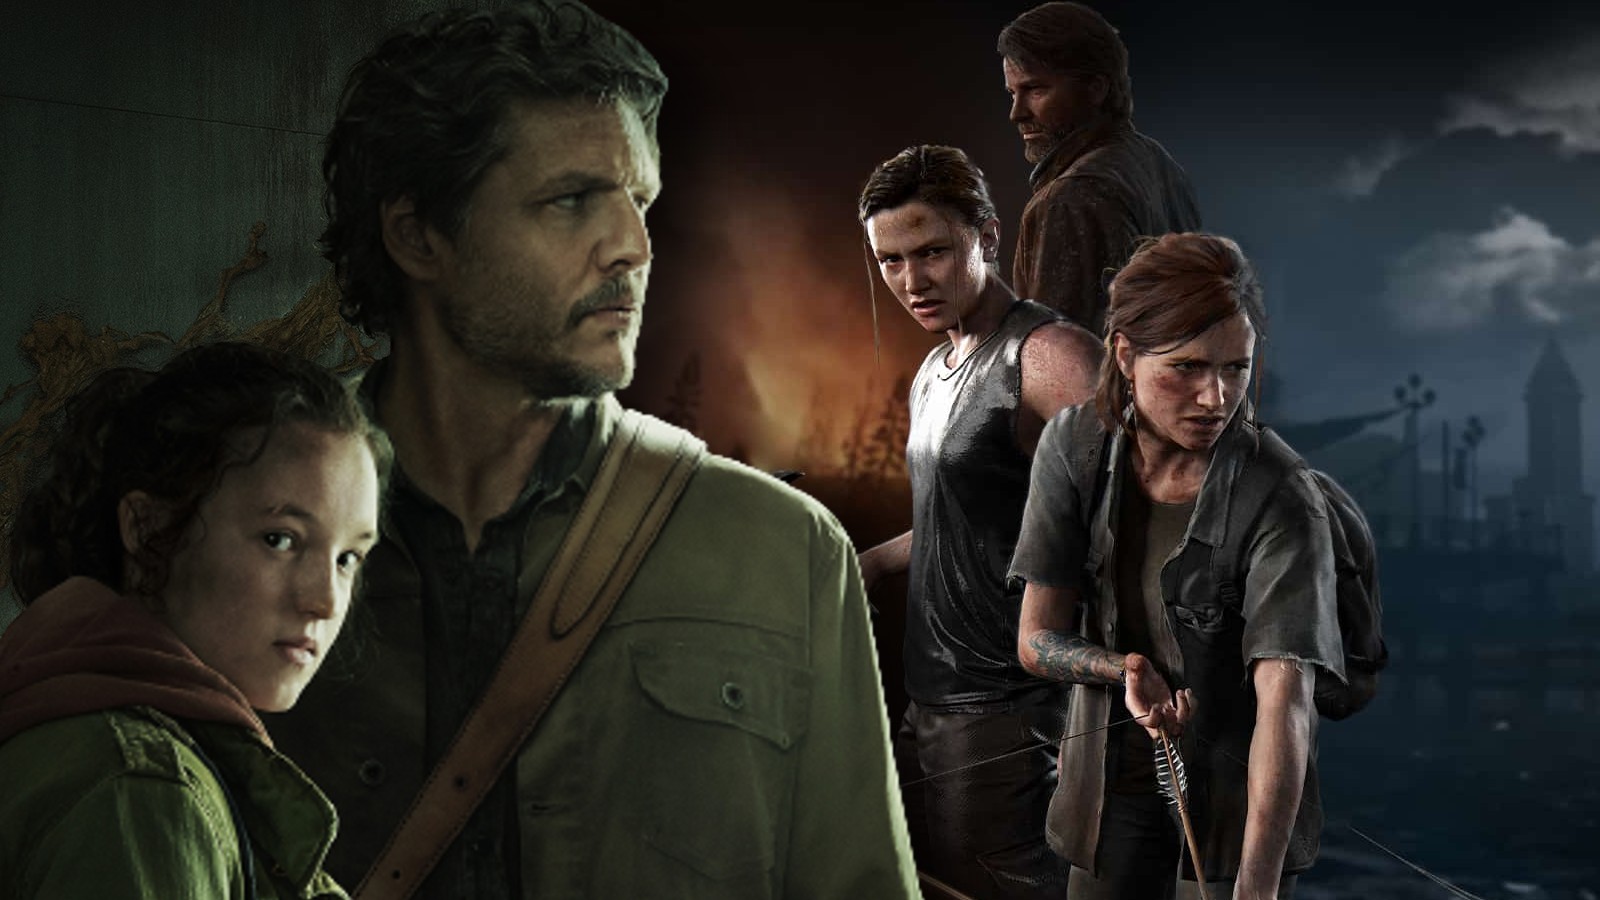 The Last of Us season 2 potential release date, cast, plot and more